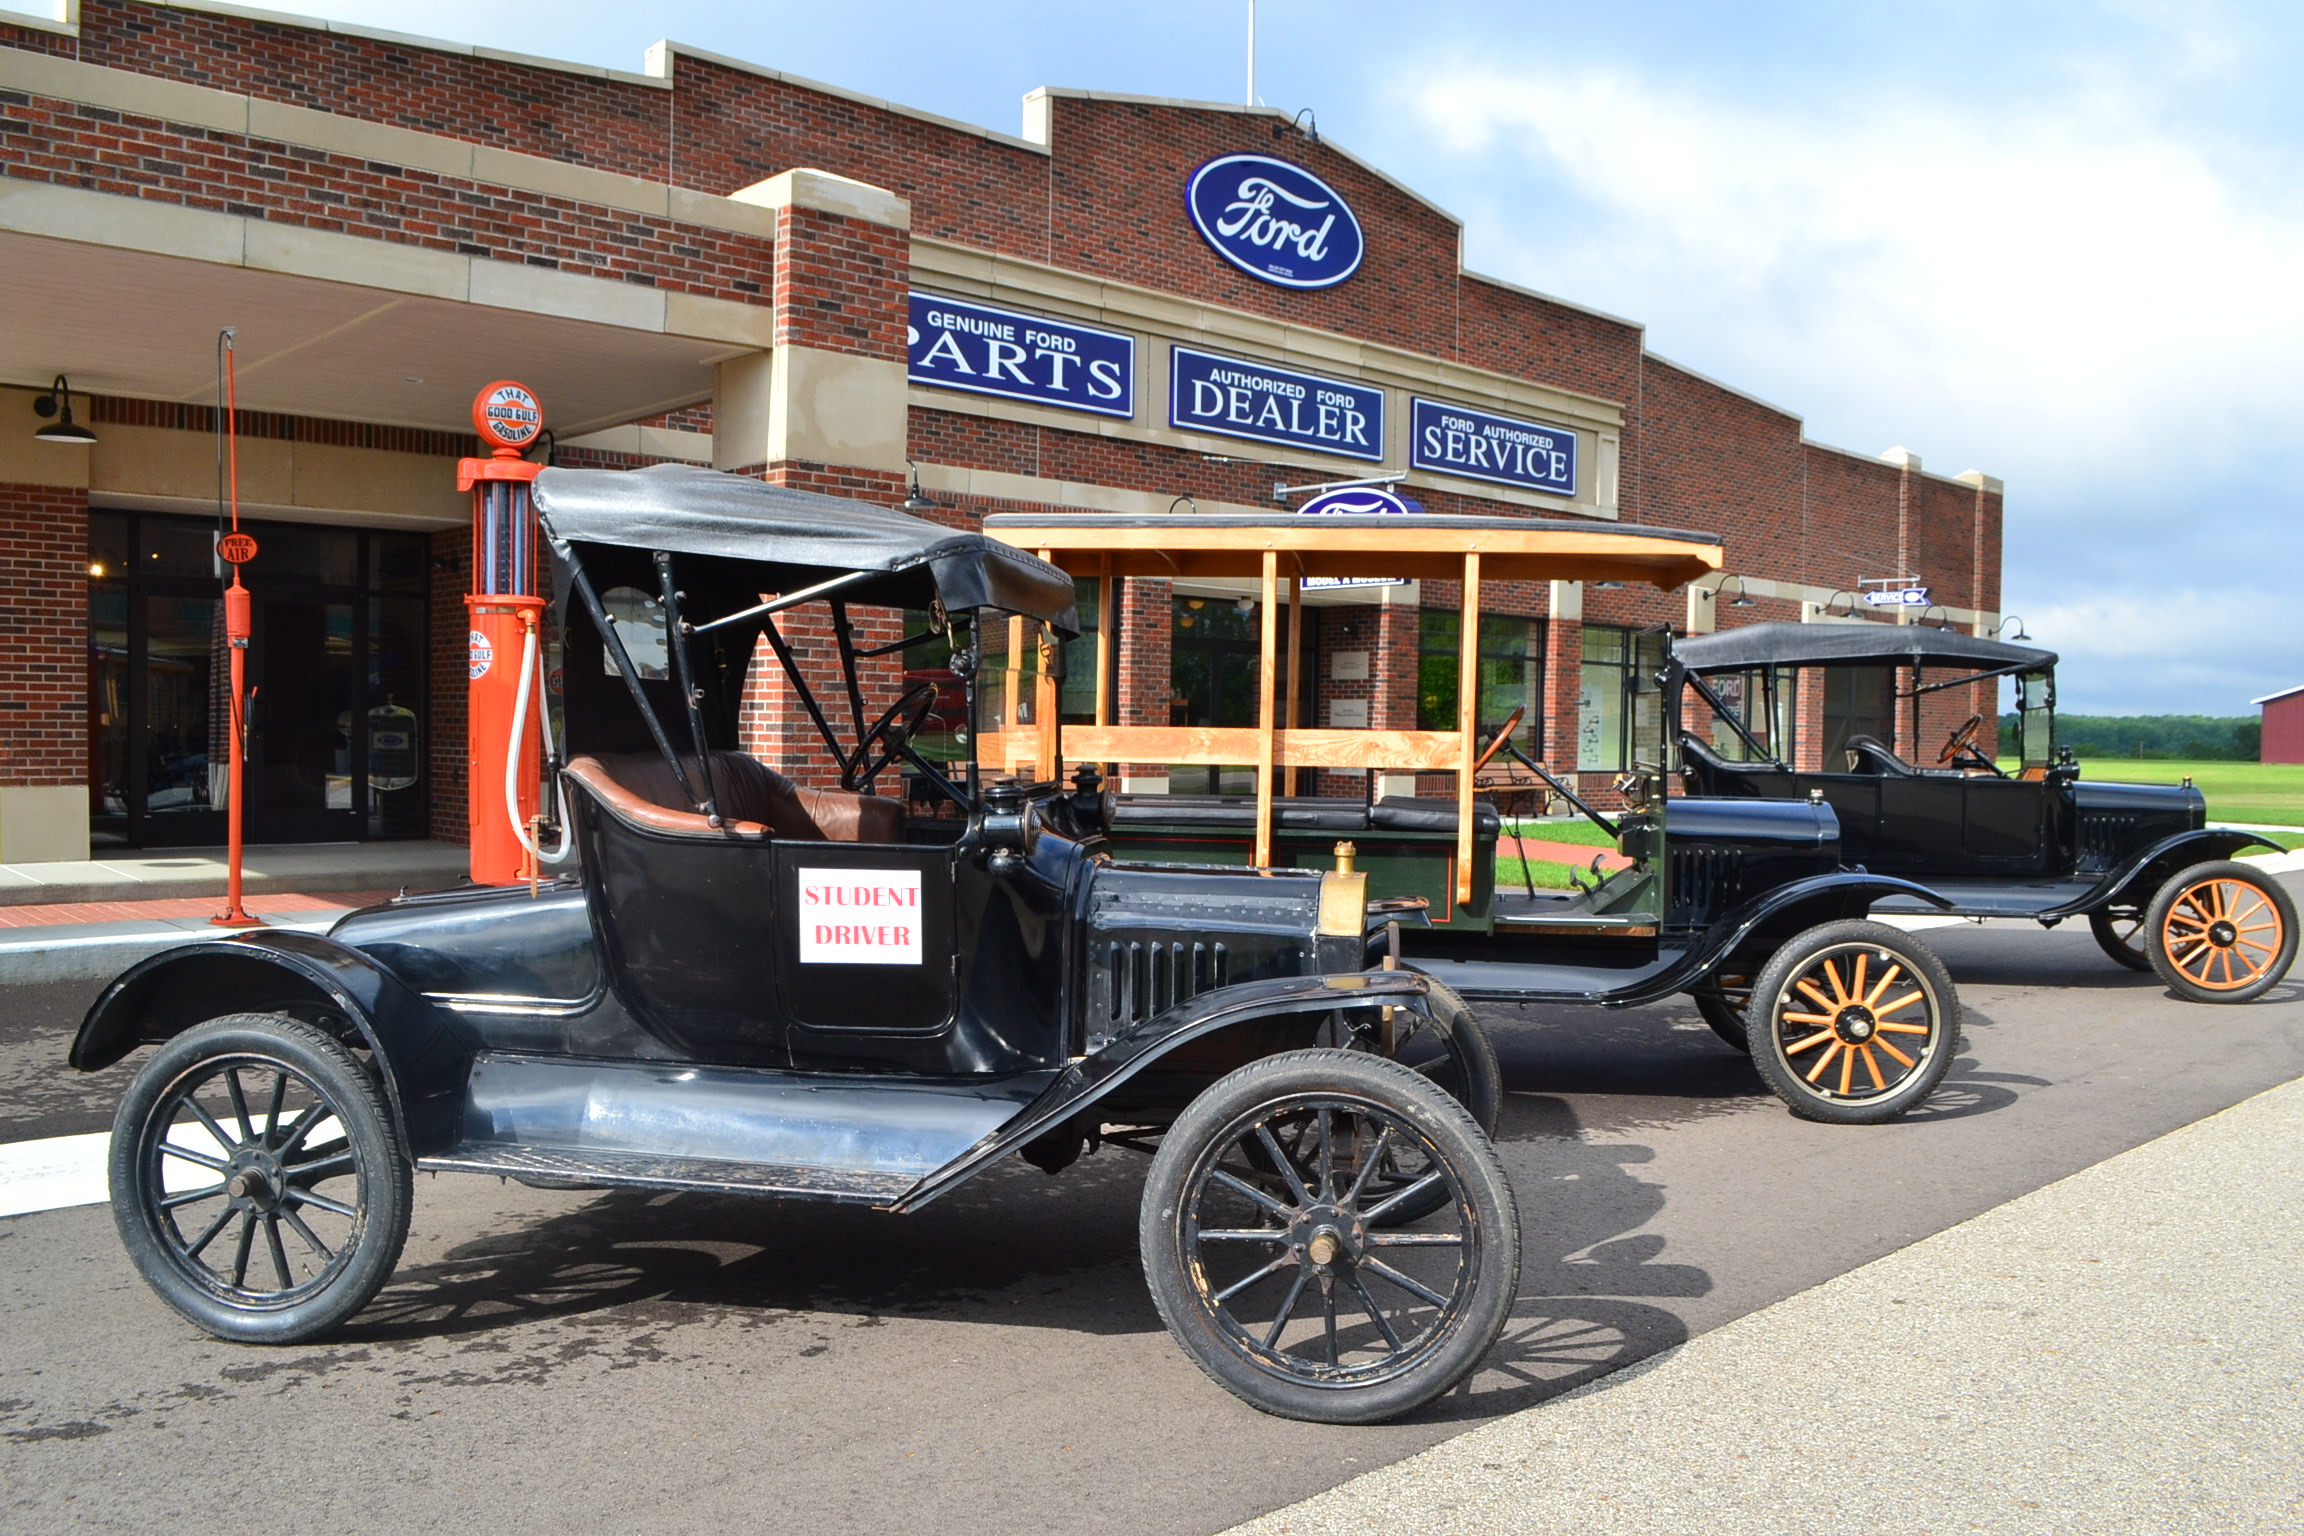 Model T, T time: Gilmore museum offers Model T driving experiences, ClassicCars.com Journal